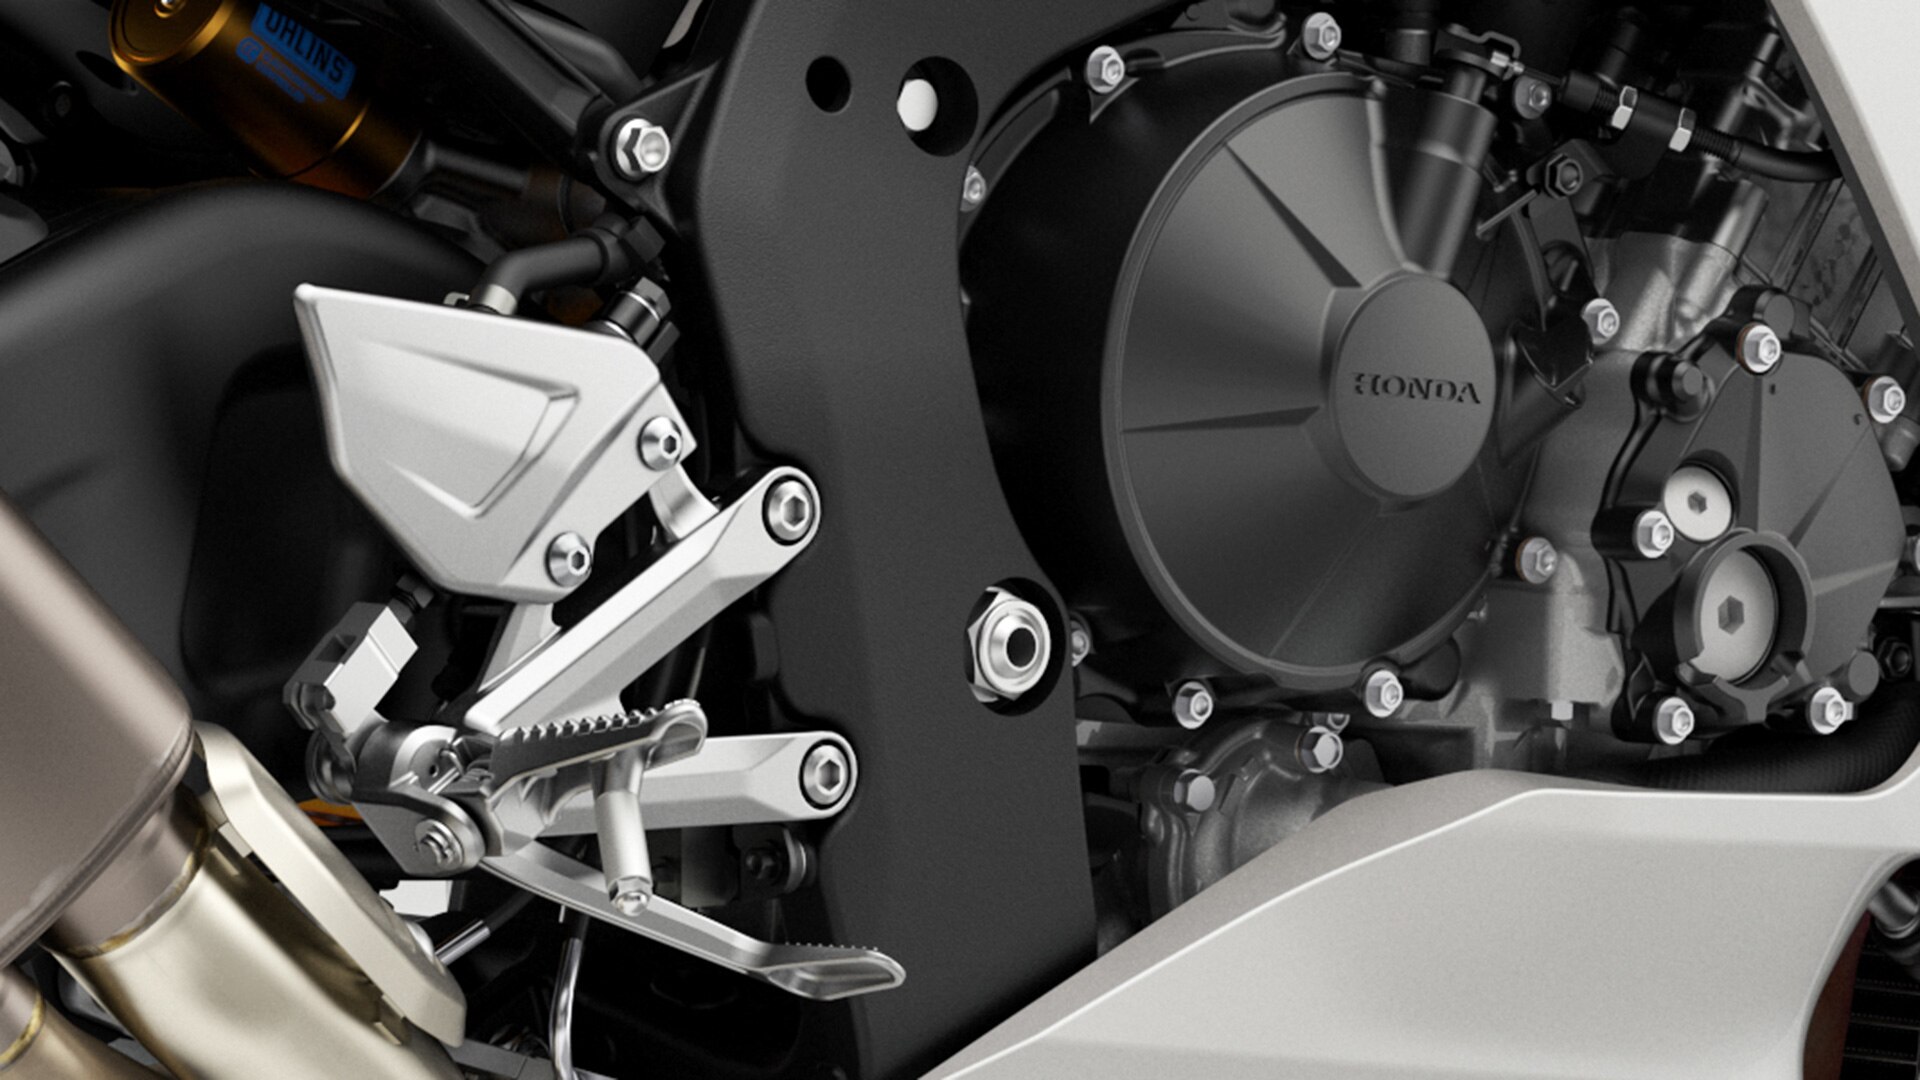 Close-up of liquid-cooled inline four cylinder engine and cam lobes.